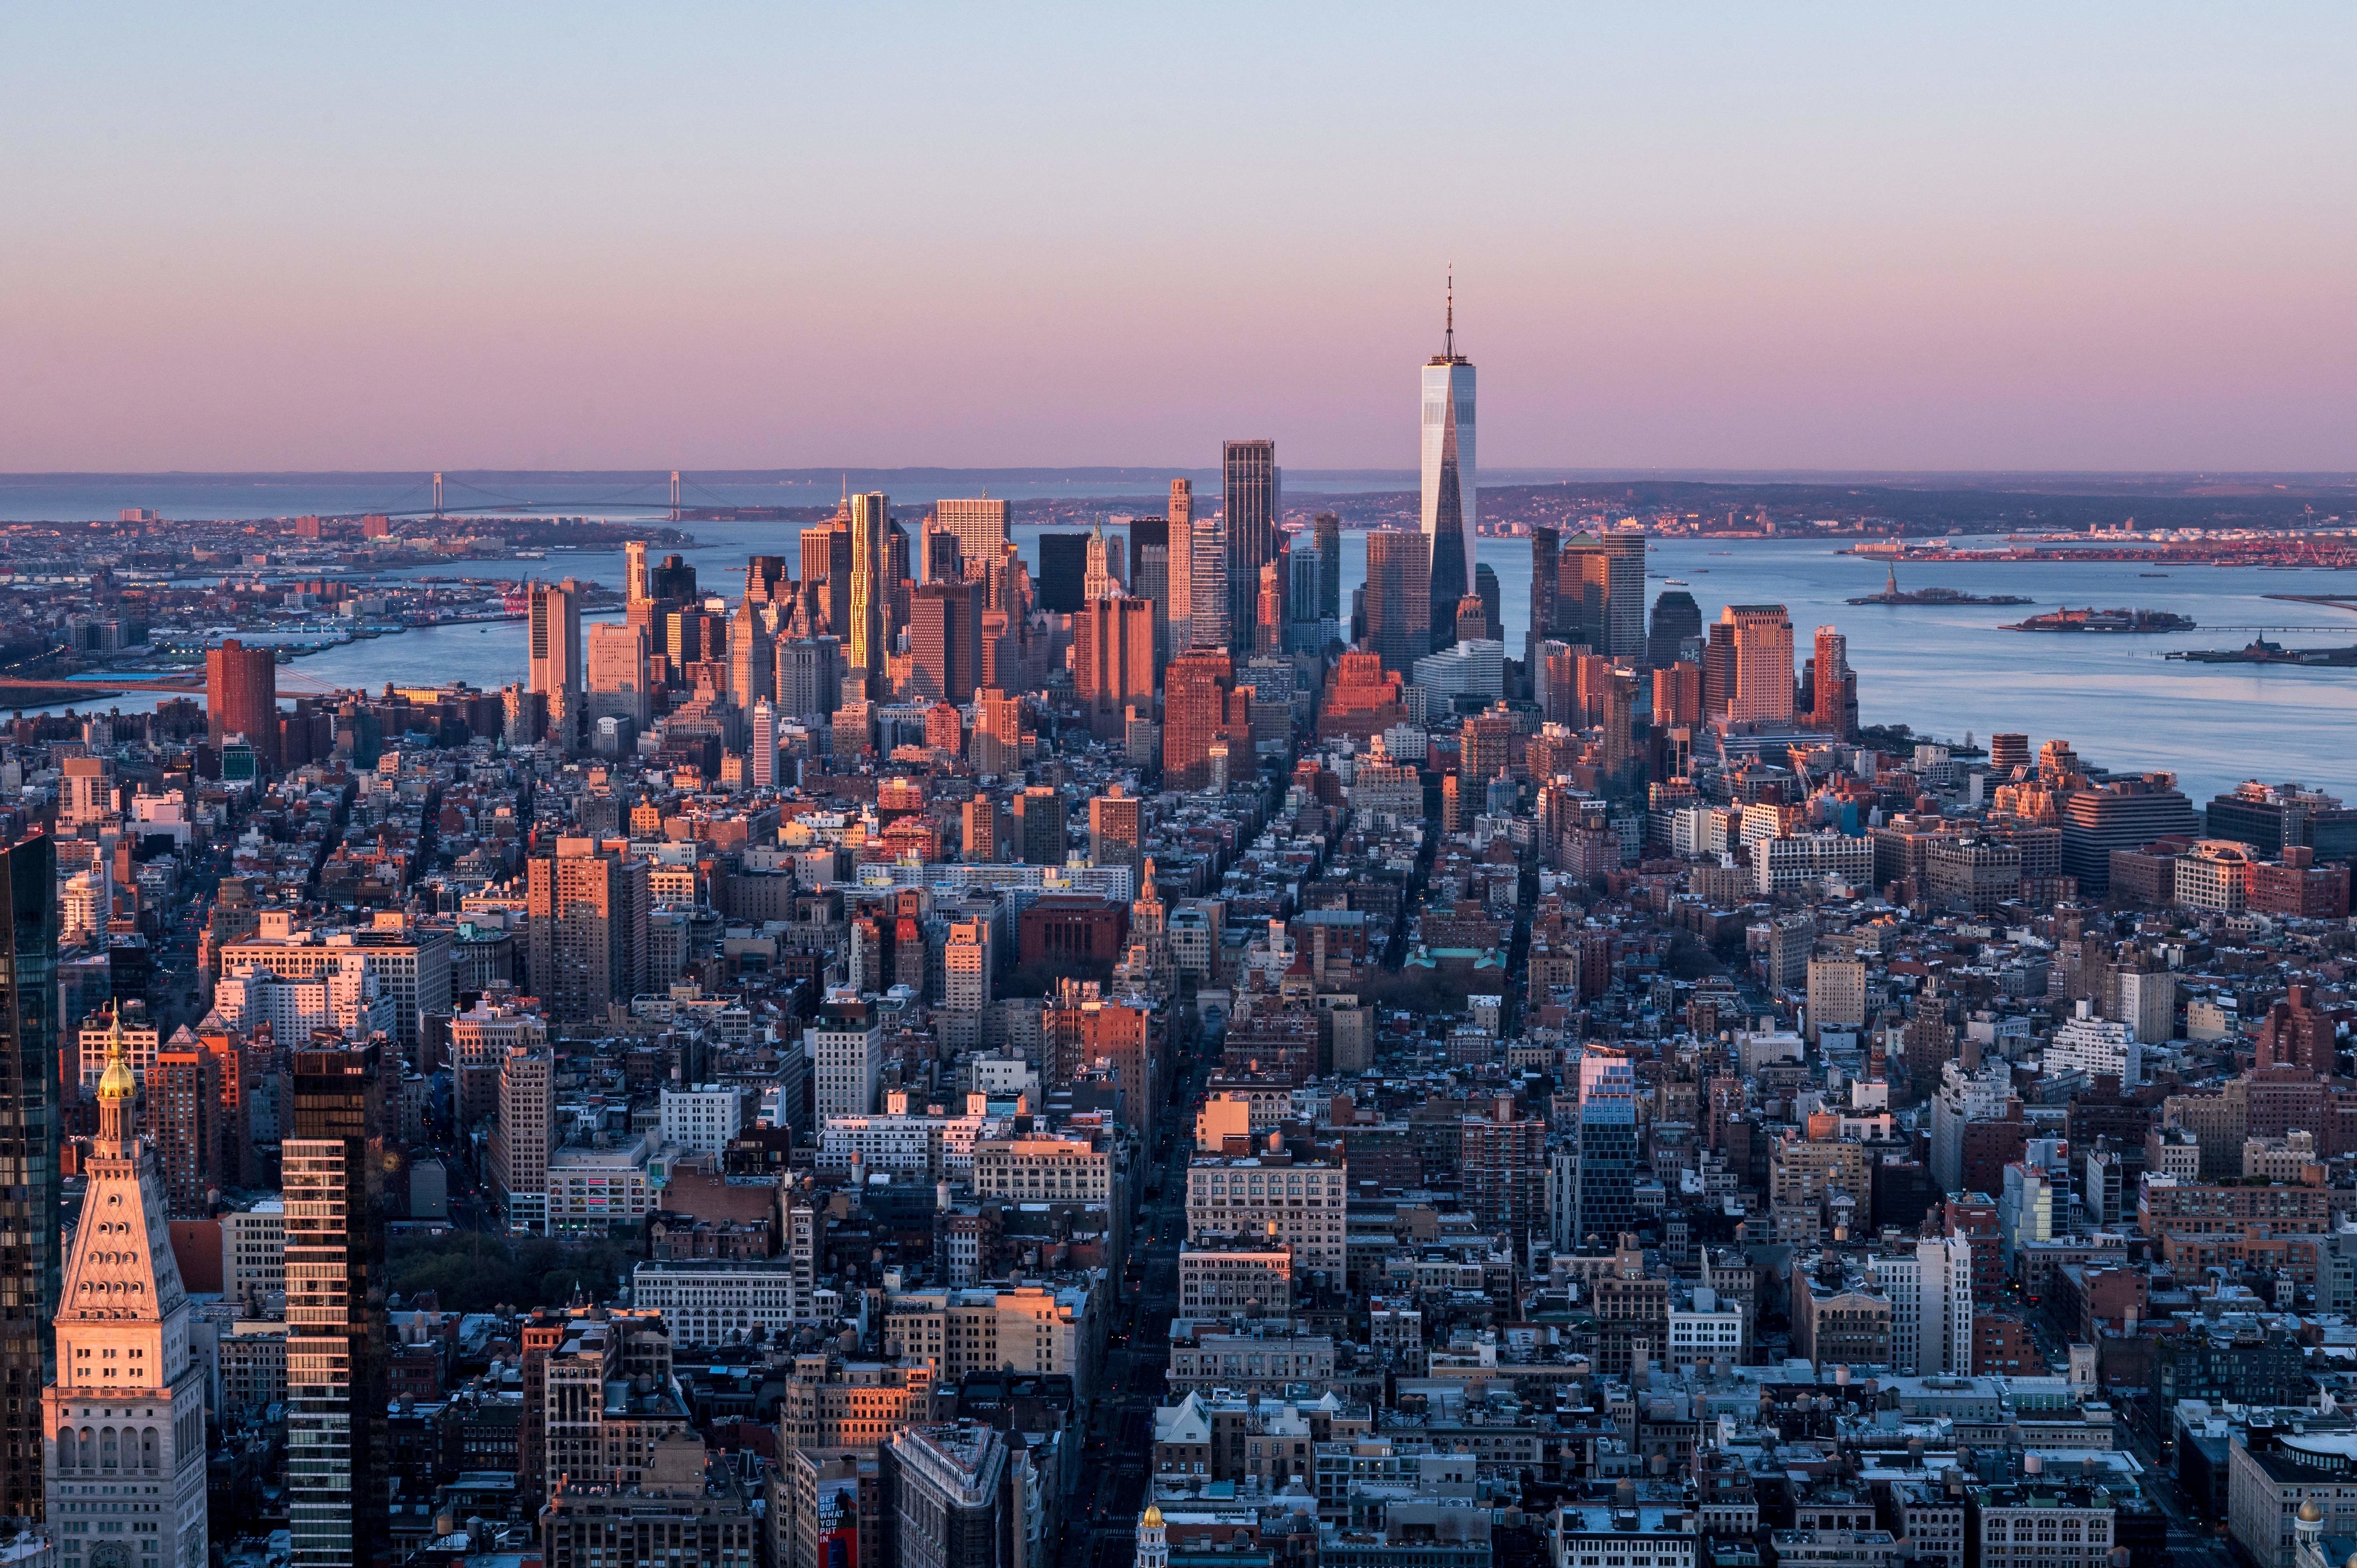 Aerial view of a city skyline at sunset with prominent skyscrapers